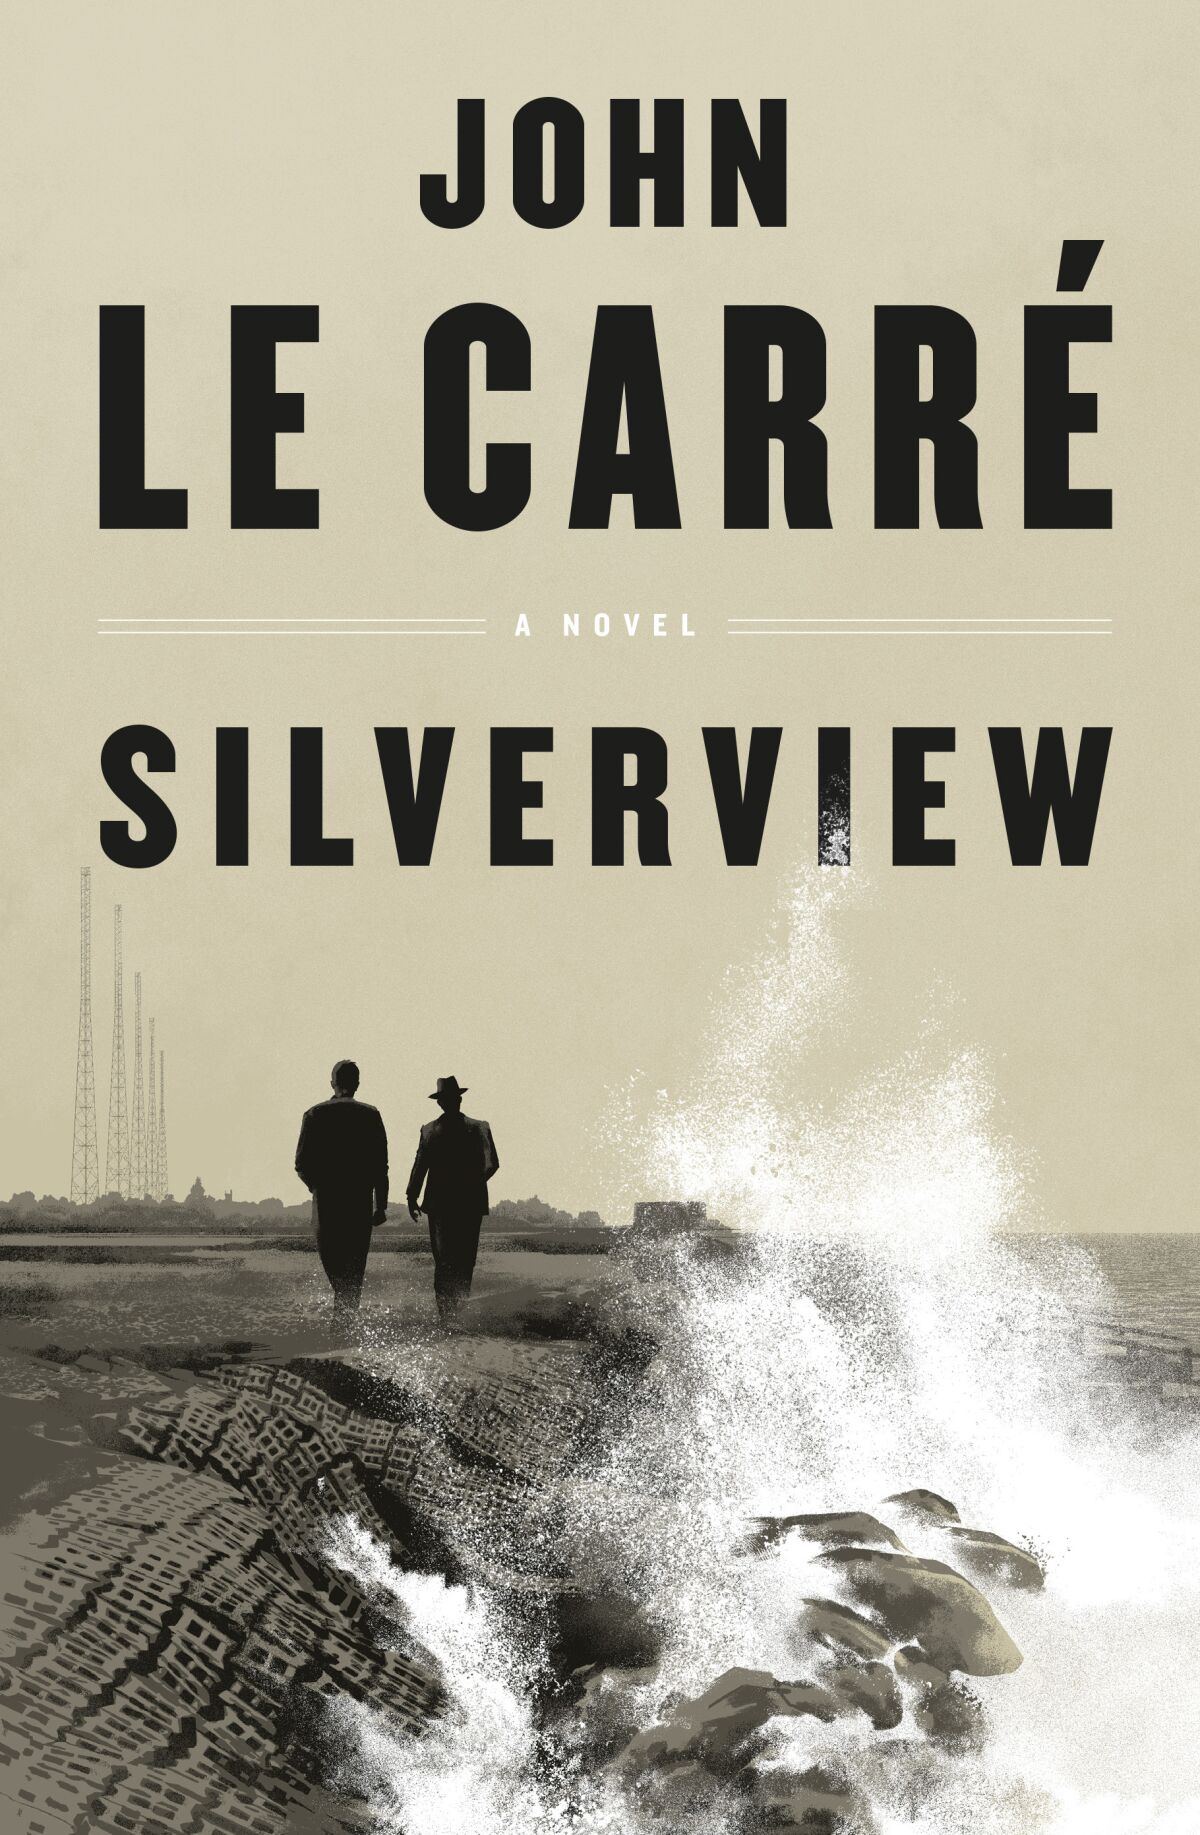 Two men walk along the coast on the cover of "Silverview," by John Le Carré.